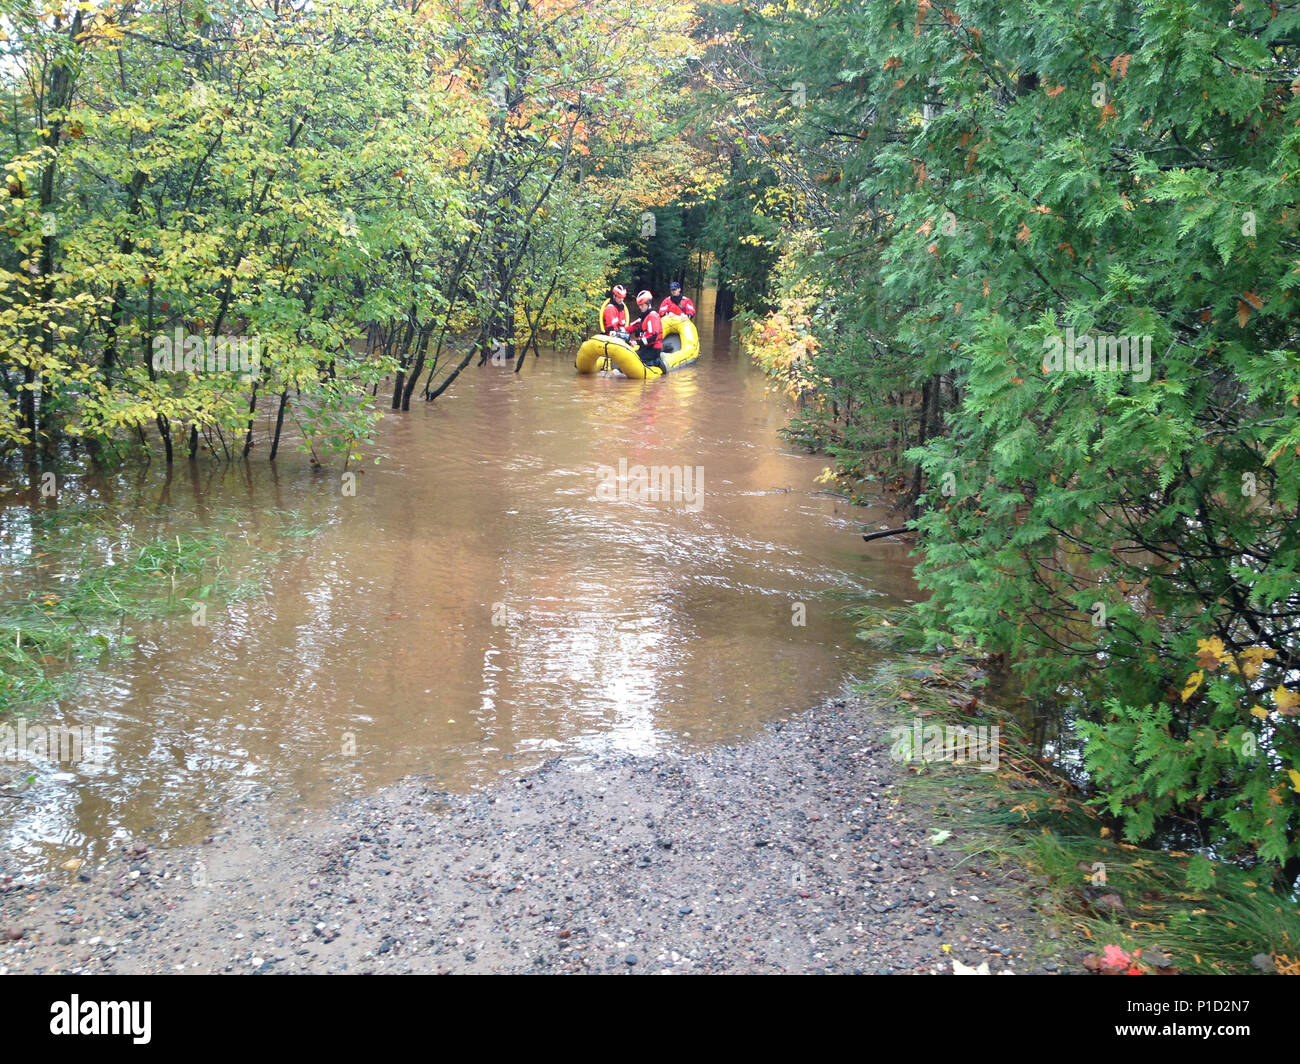 Petty Officers Gerard Gagnon, Tim Koscielny and Terry Bailey launch a rescue skiff Oct. 18 ,2016, down a flooded driveway near the Chocolay River in Marquette, Michigan. Crews worked with the Chocolay Fire Department evacuating citizens from their homes located along the river. (U.S. Coast Guard photo by Station Marquette) Stock Photo